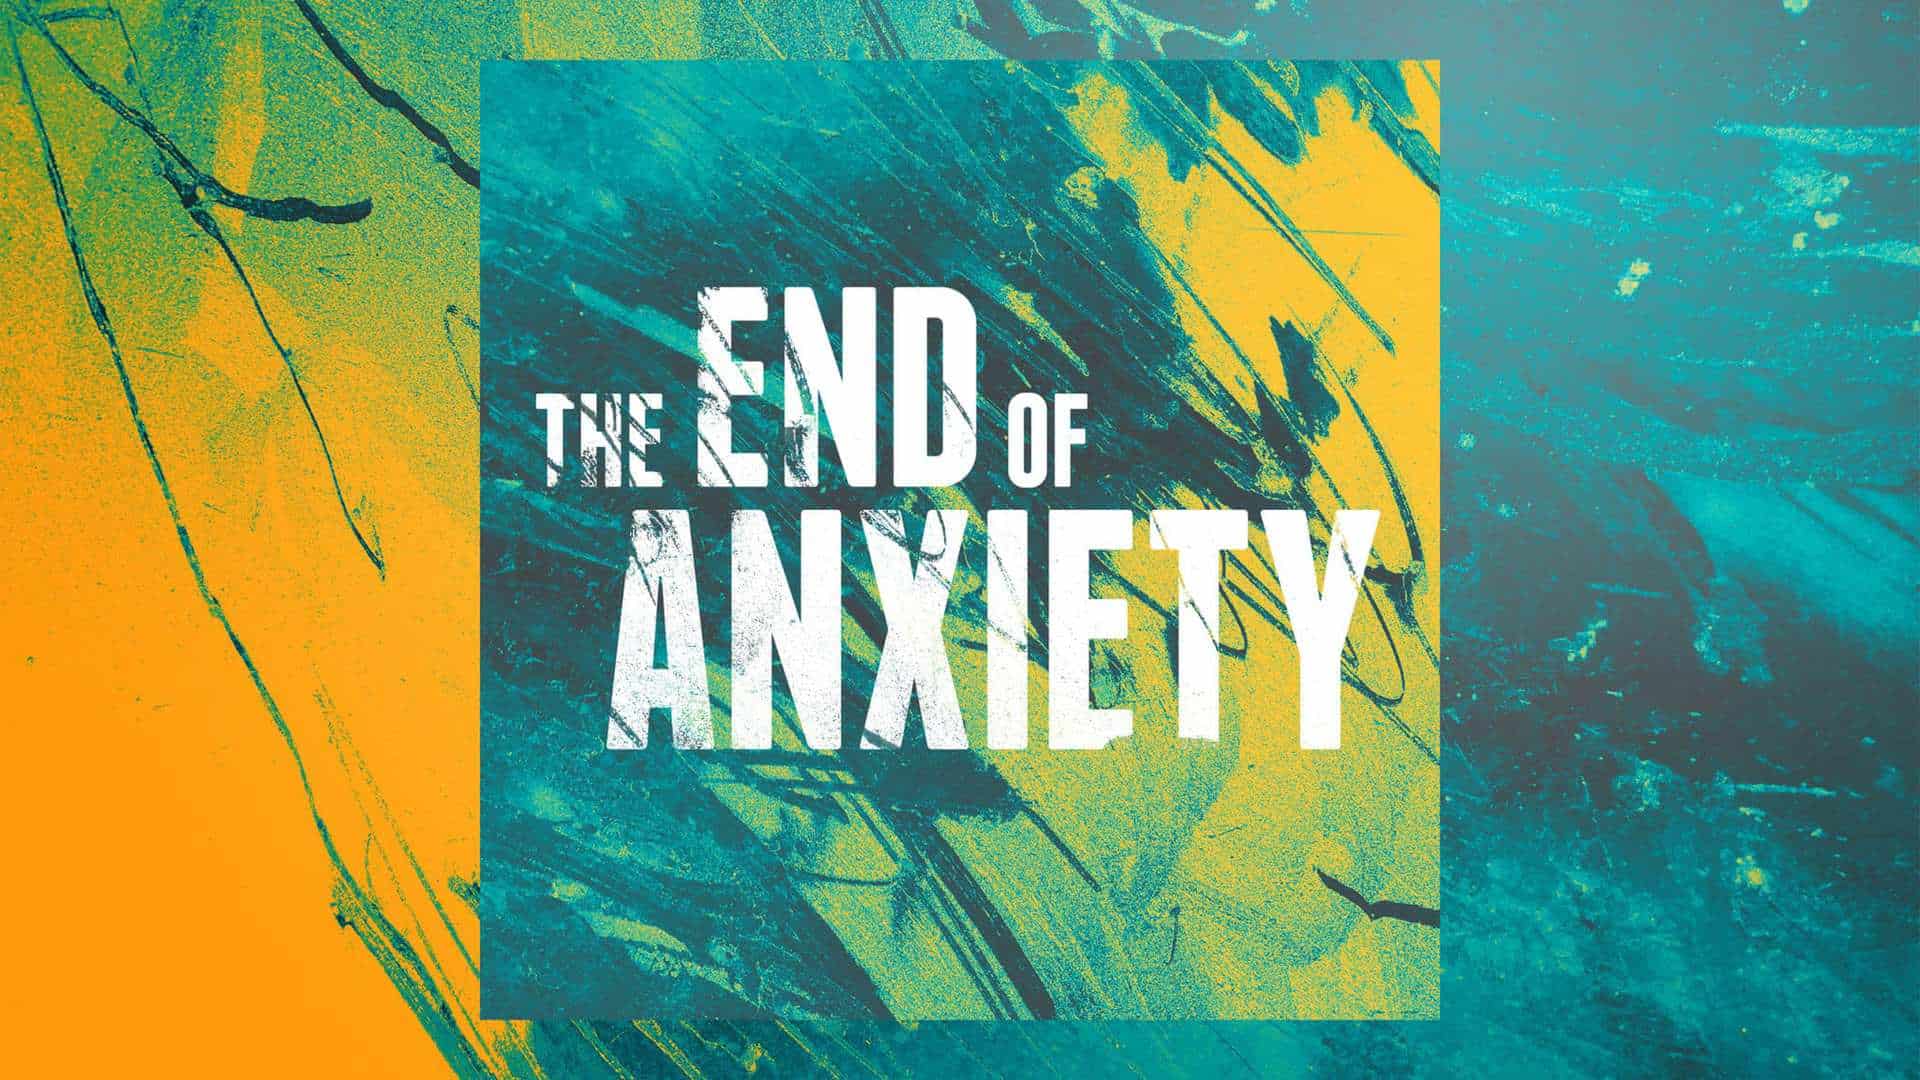 The end of anxiety: Stand firm in the face of fear - 7/26/20 Image